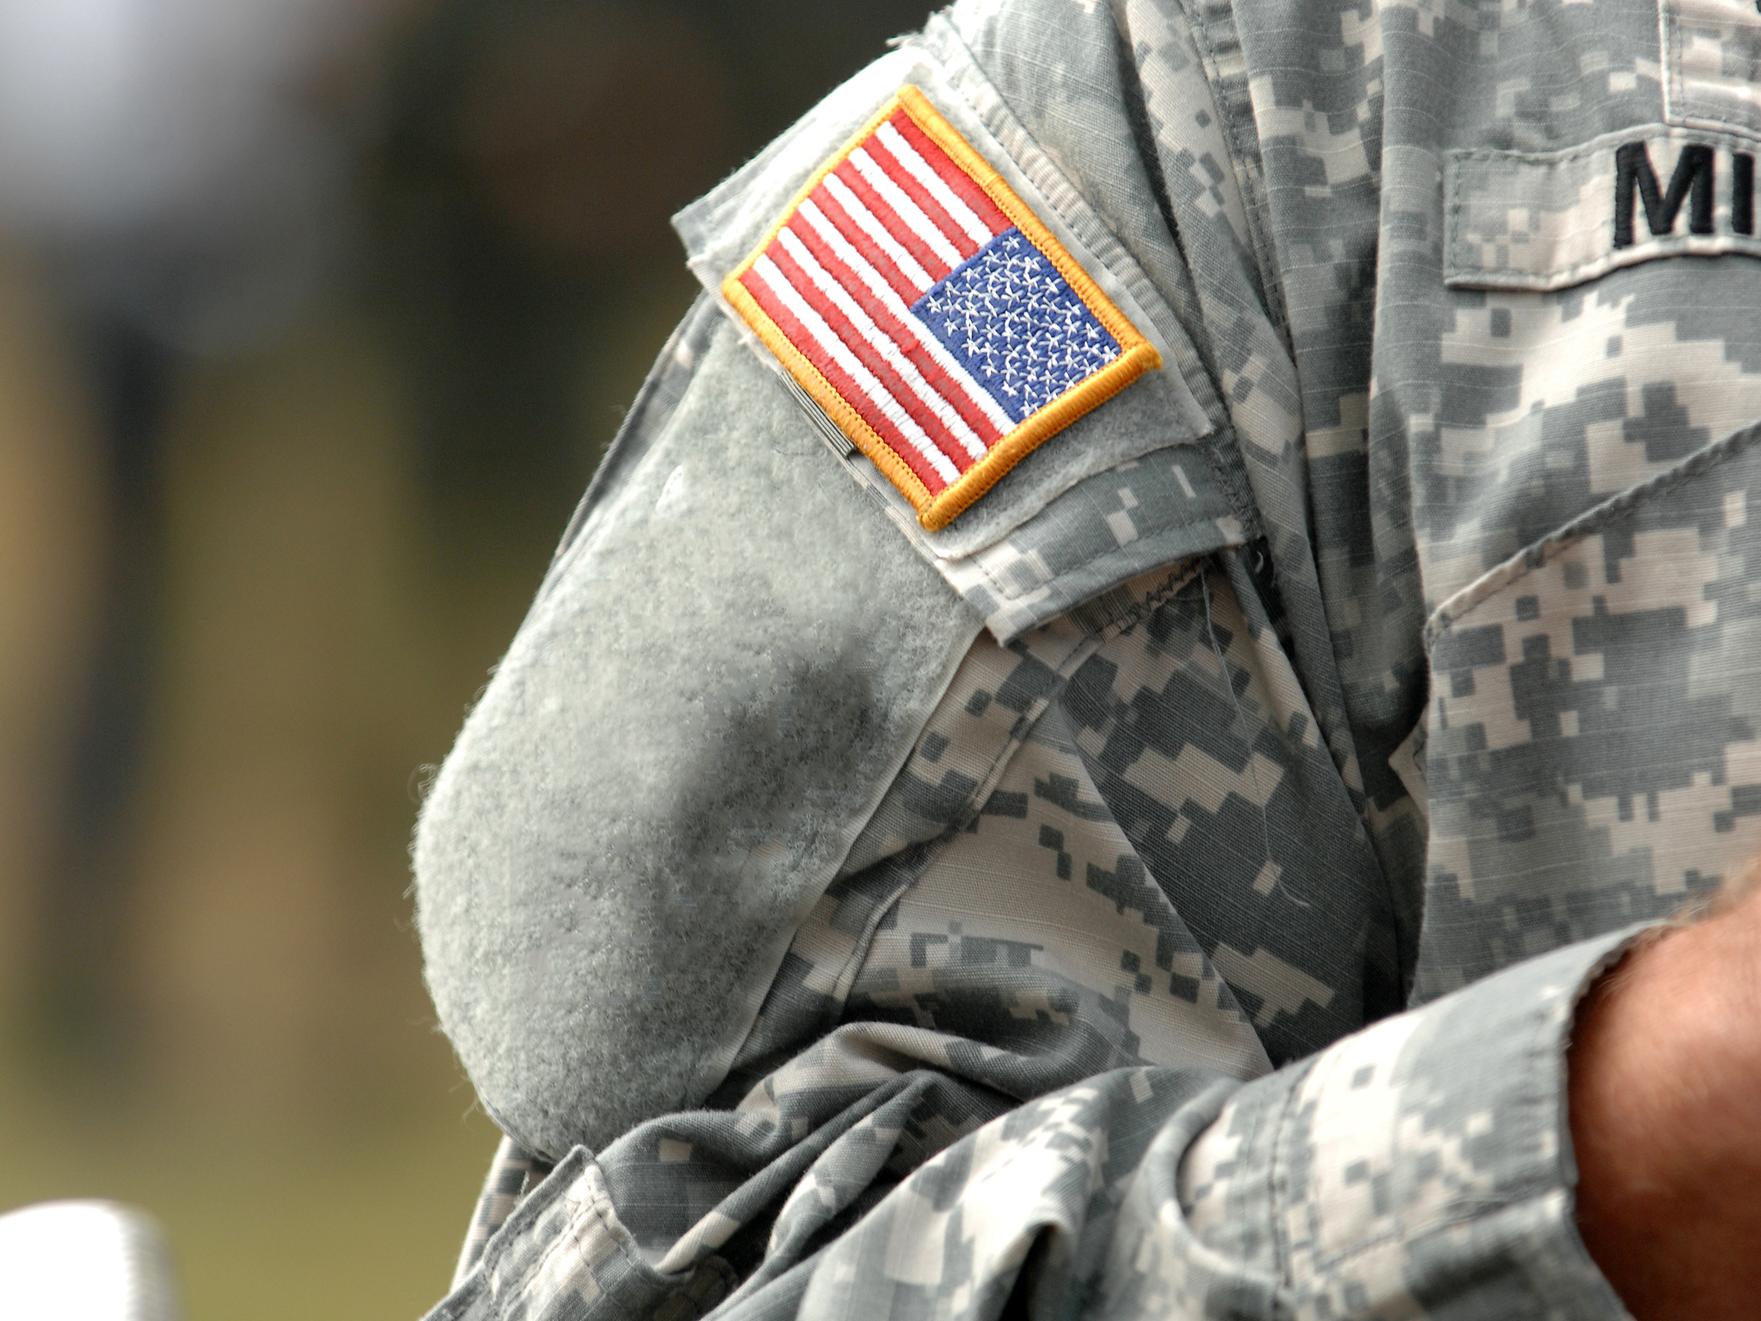 The sleeve of a US soldier with flag patch